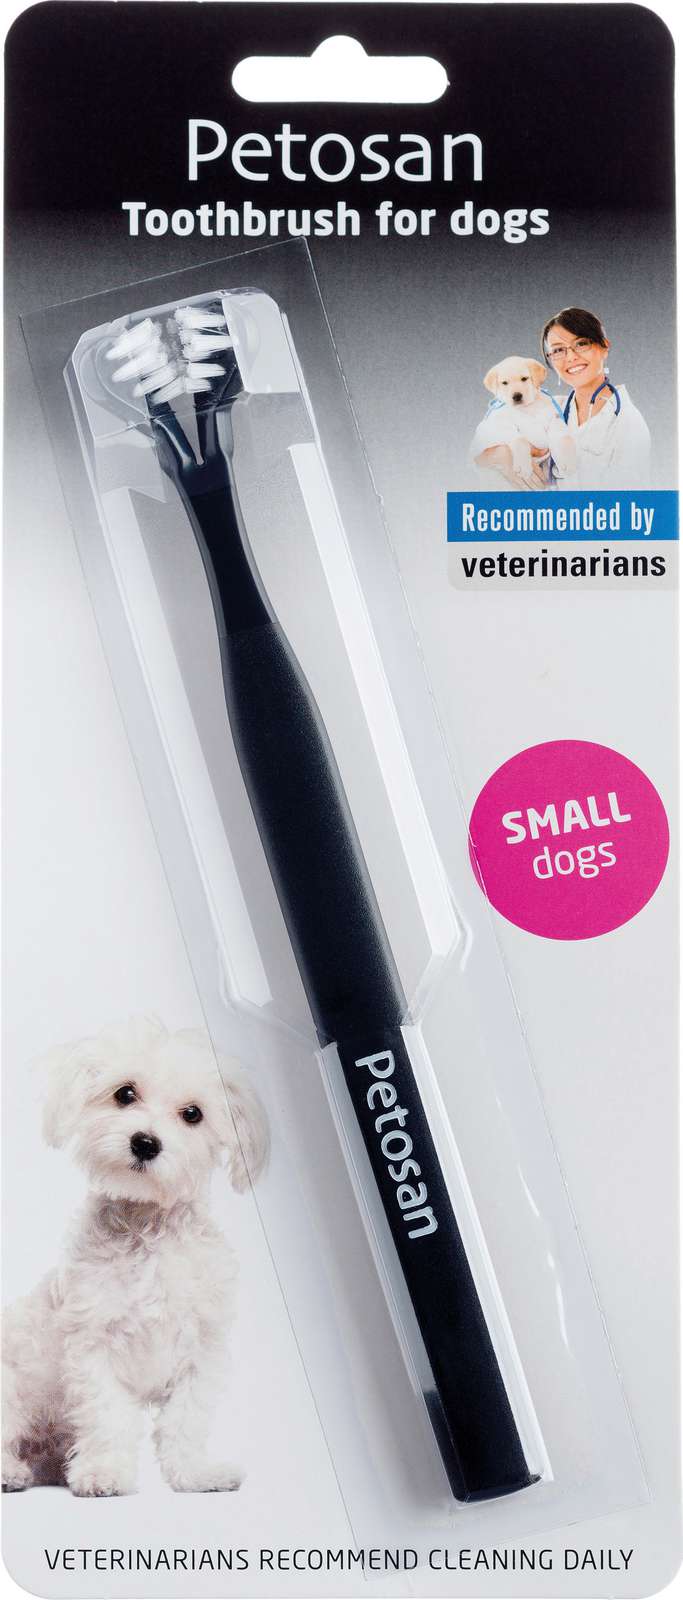 Toothbrush for dogs